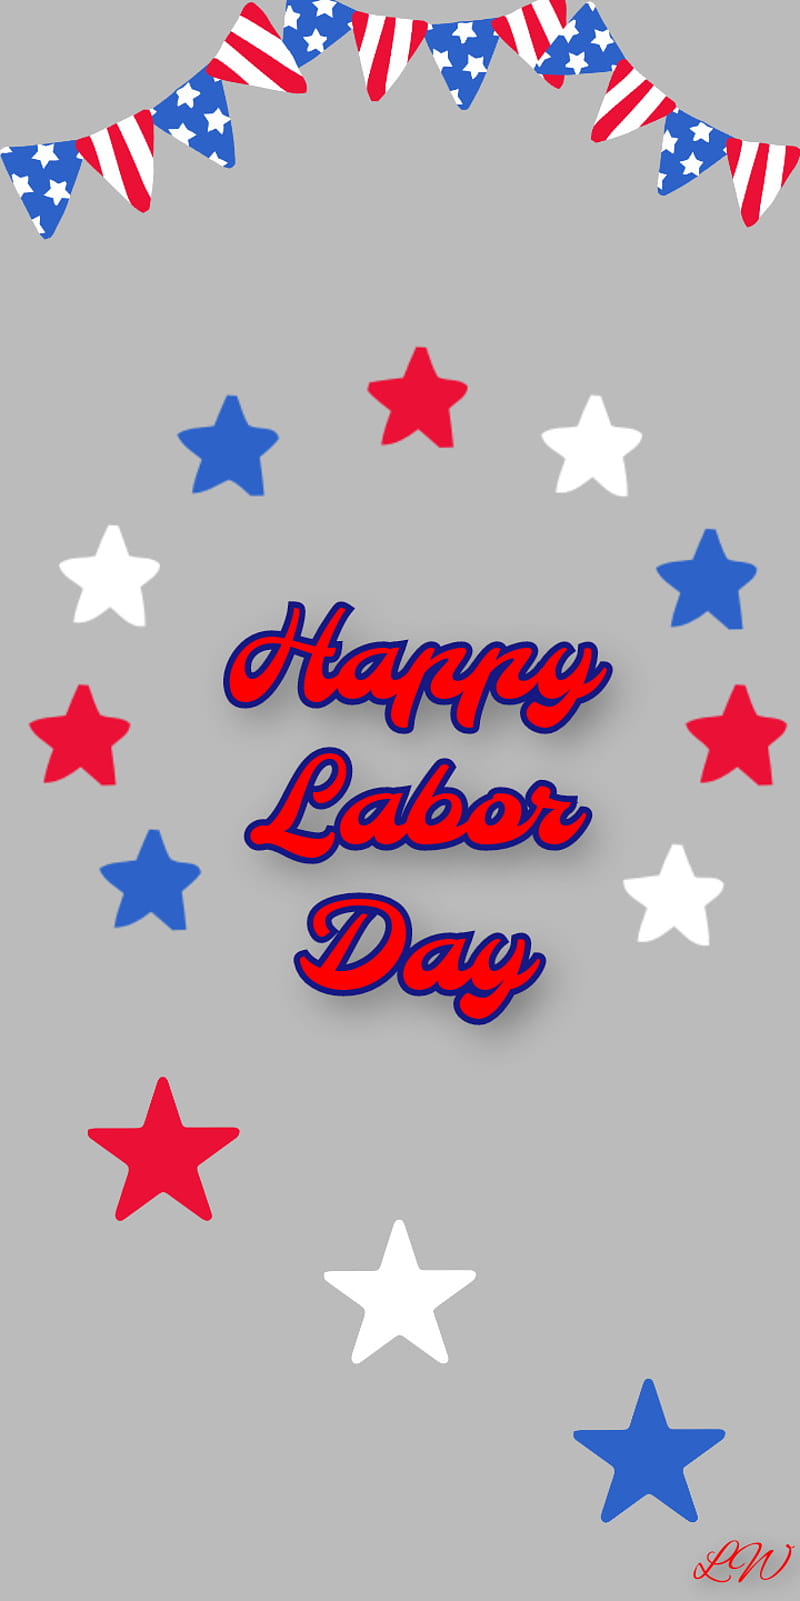 Labor day weekend, celebrate, red white and blue, holiday, labor day, HD phone wallpaper